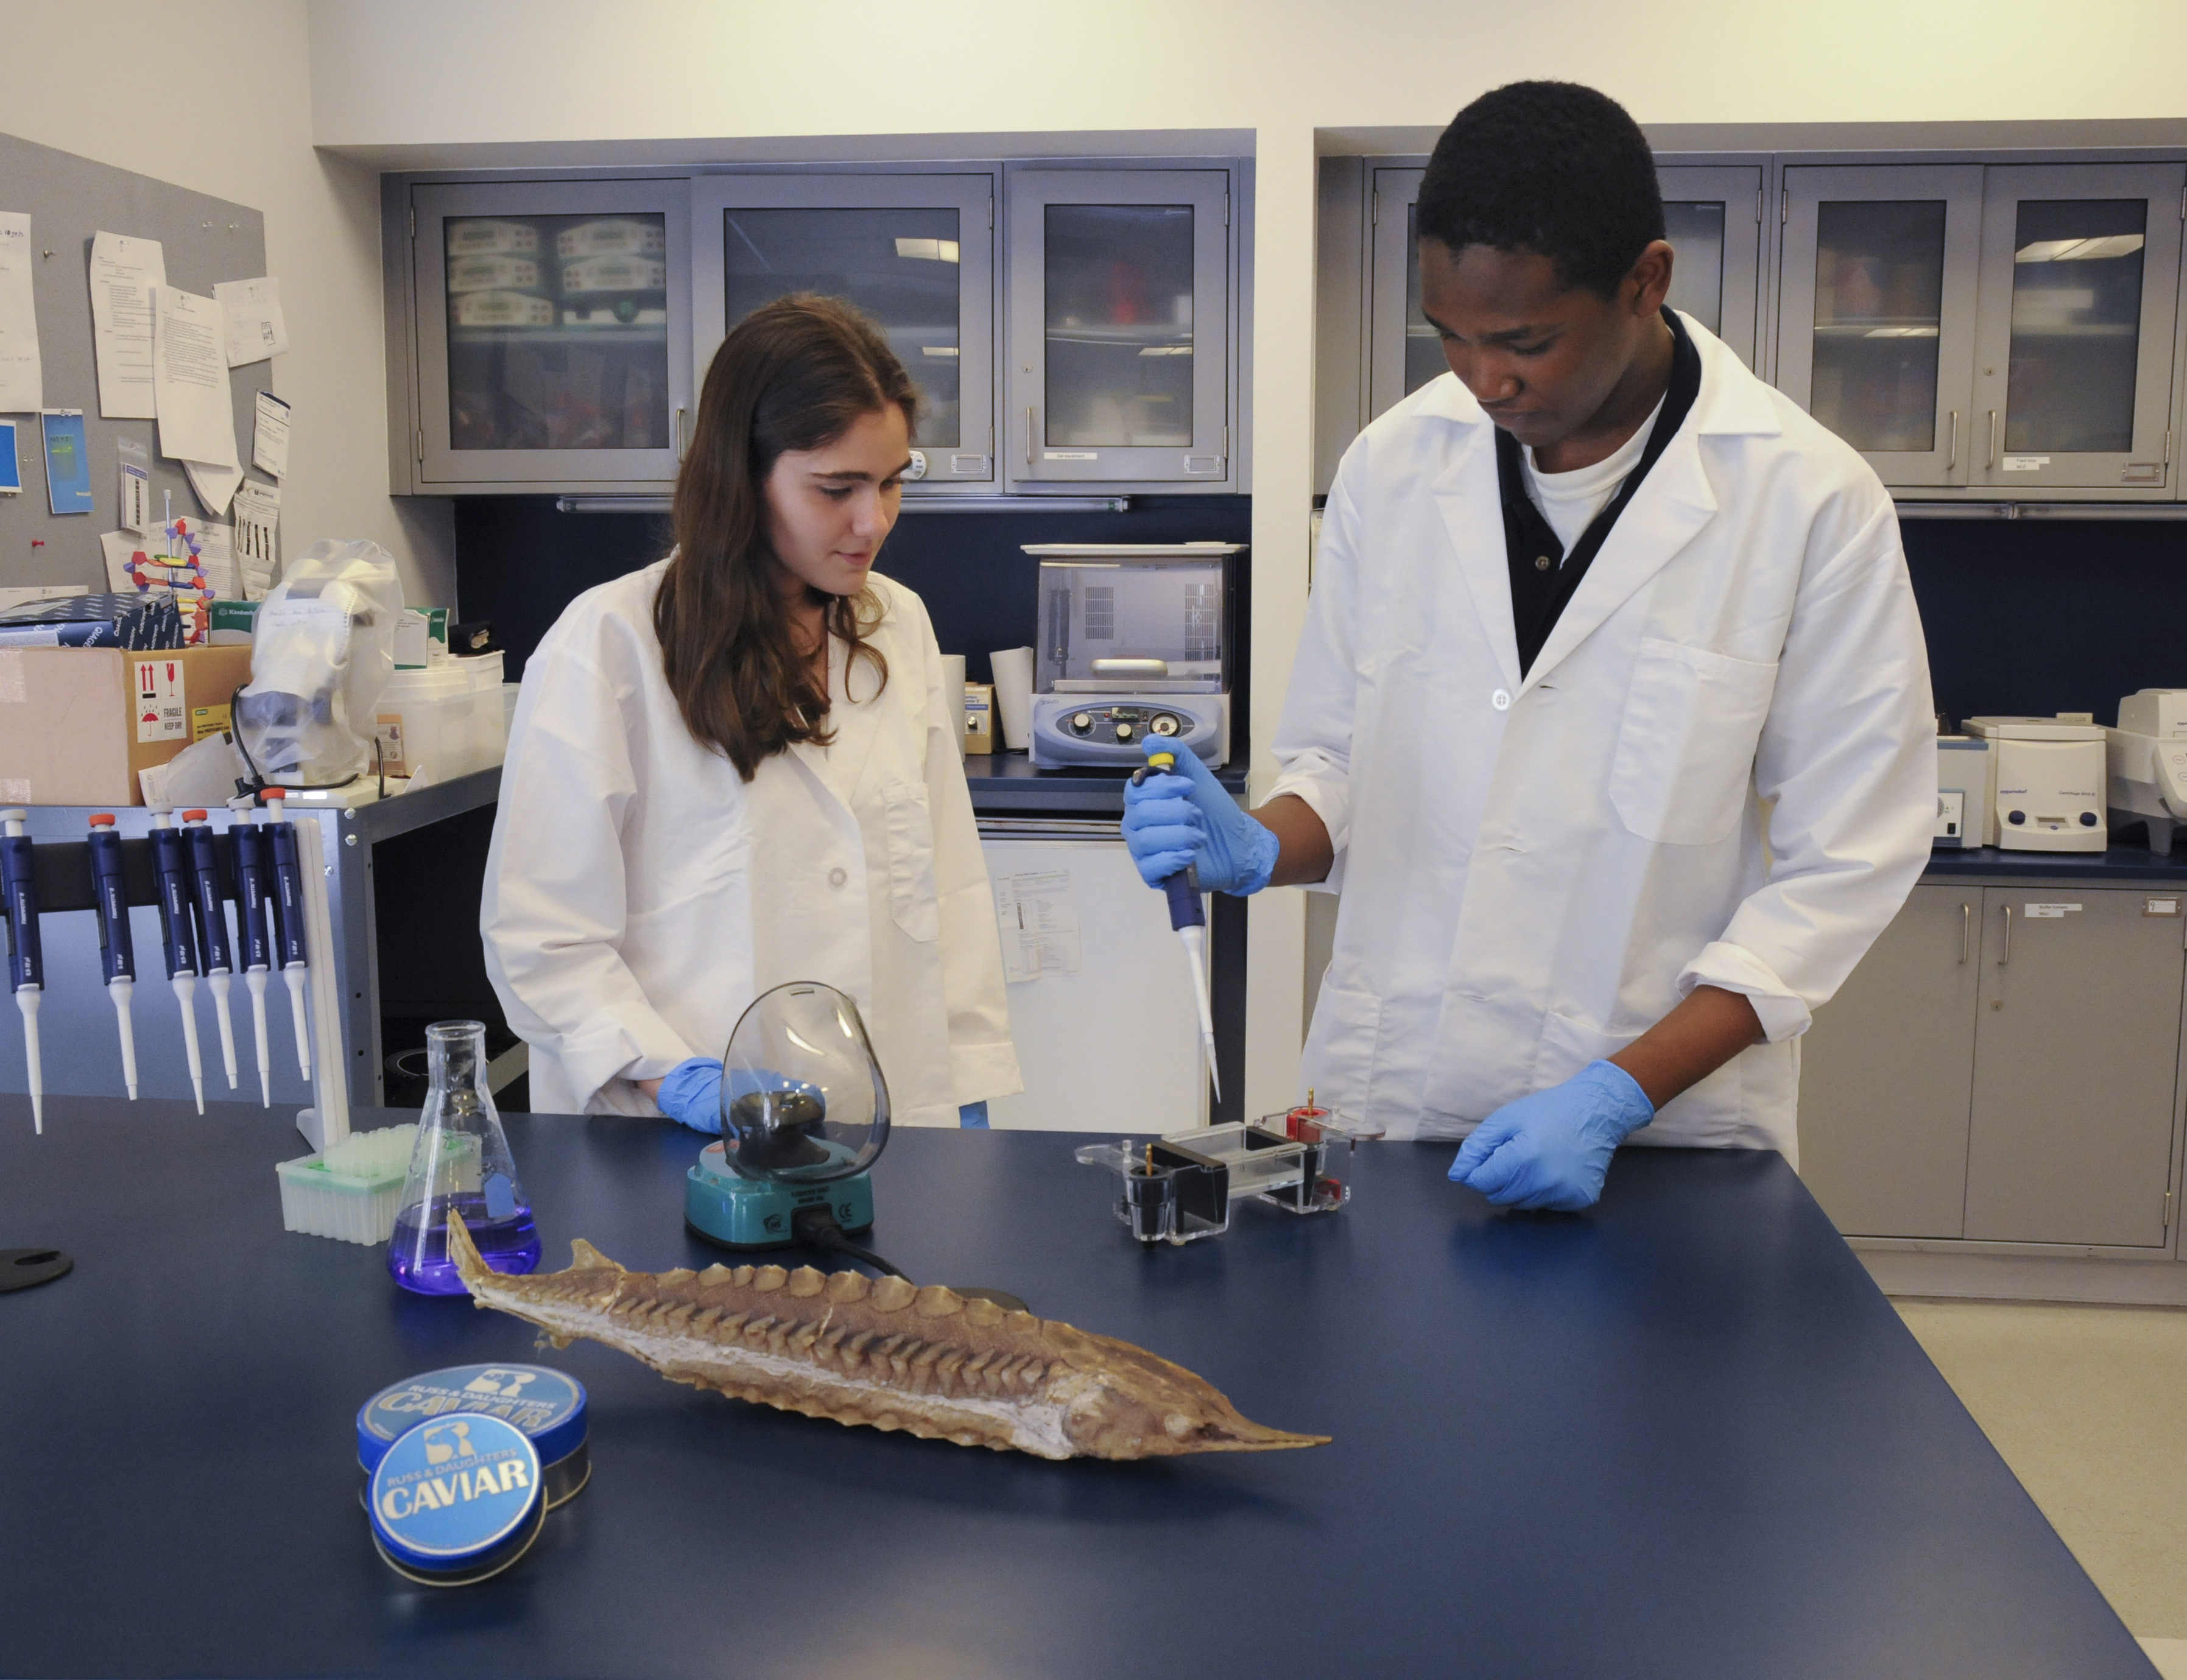 Two teenagers wearing lab coats at a laboratory table with equipment.